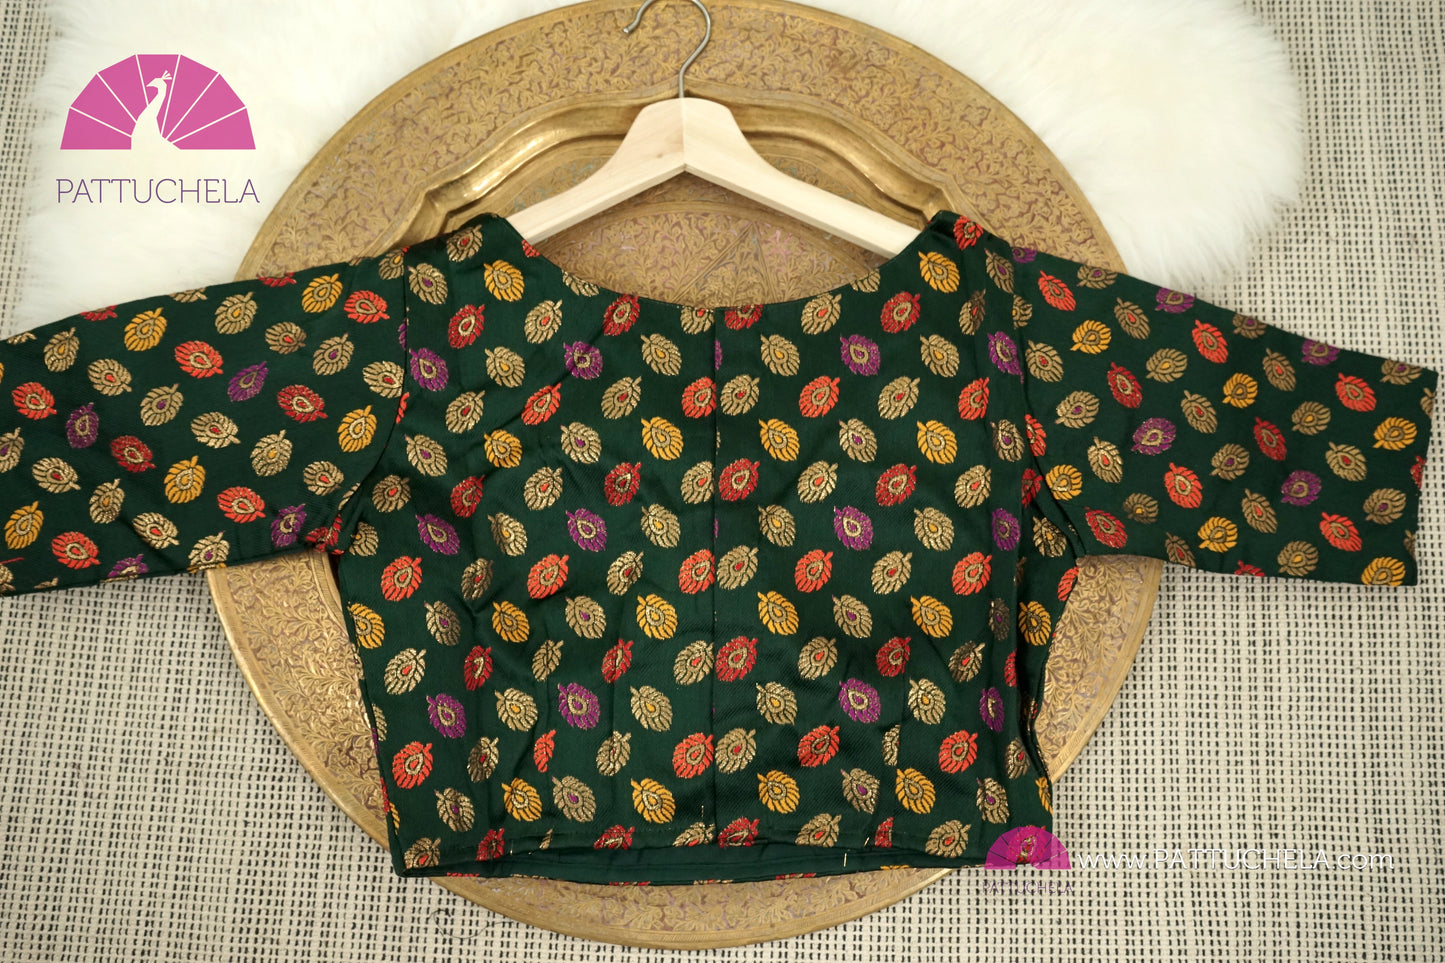 Designer Banarasi Brocade Readymade Green Blouse with floral Pattern For Women for Party, Festivals, Occasion Wear | Ready made Blouse